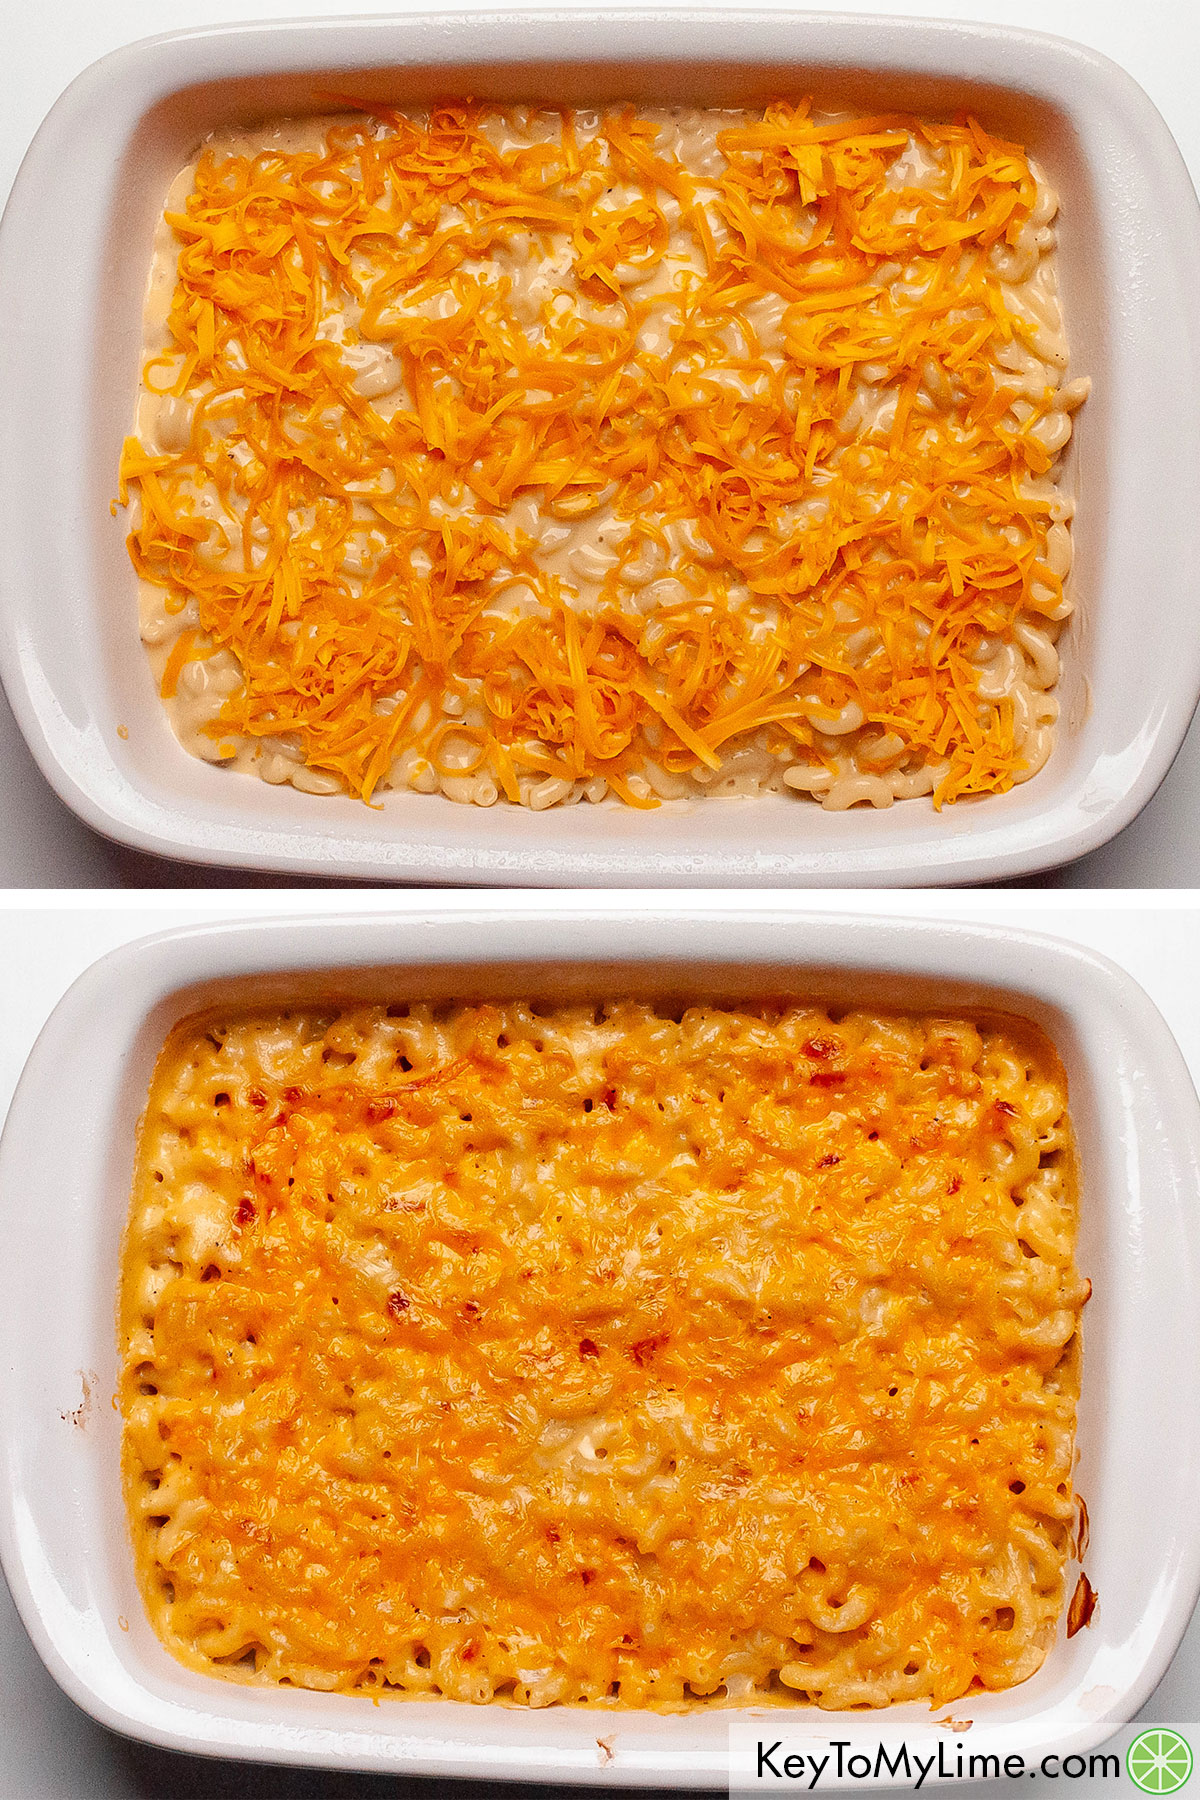 Spreading the mac and cheese out in a casserole dish, then topping it with cheddar cheese, then baking it.